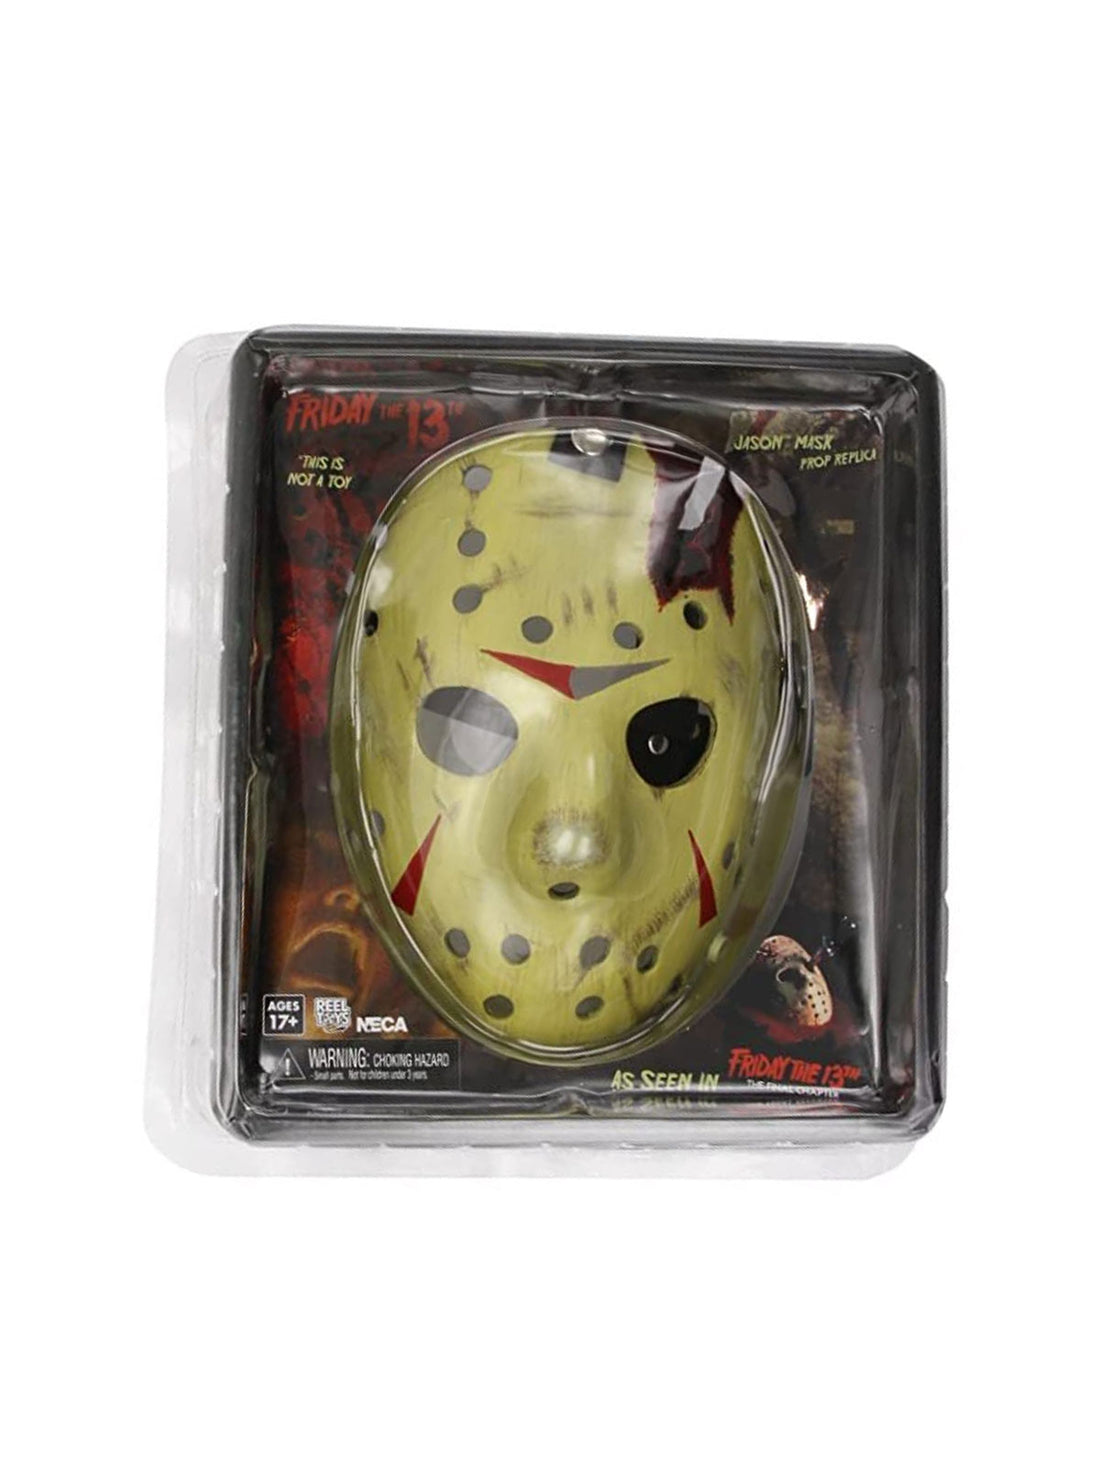 FRIDAY THE 13TH PART IV - JASON MASK PROP REPLICA